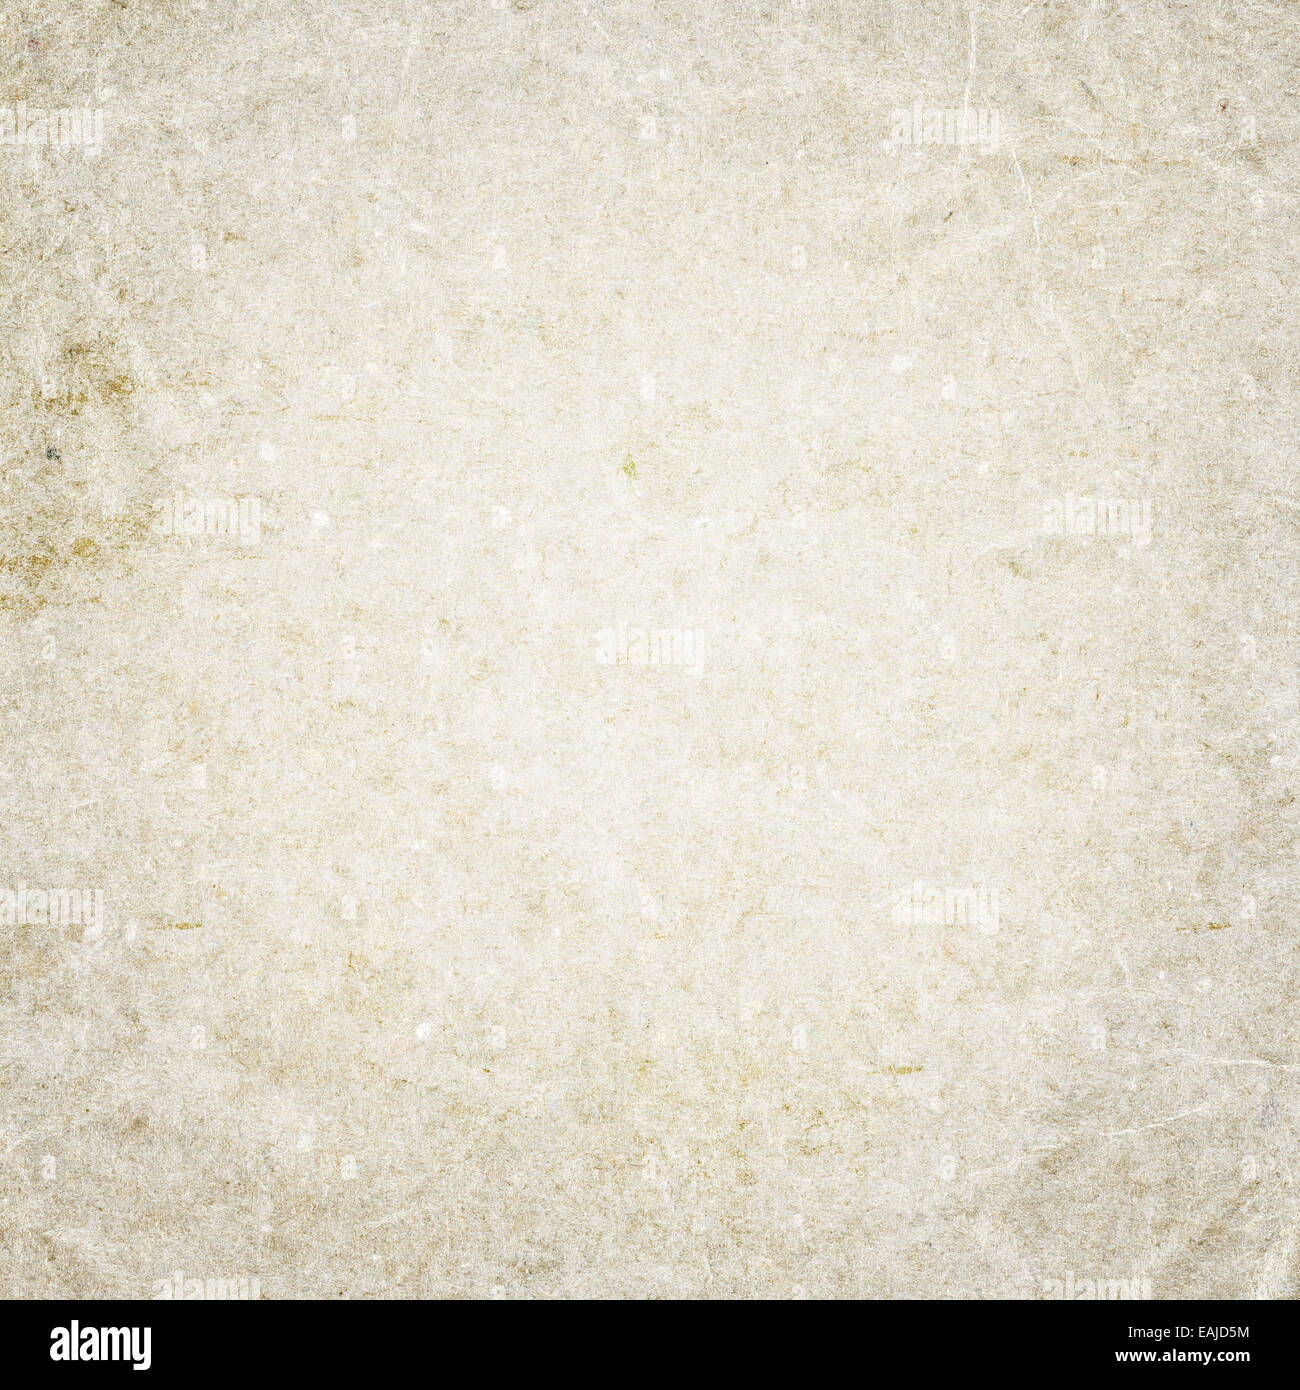 Beige stained paper texture Stock Photo